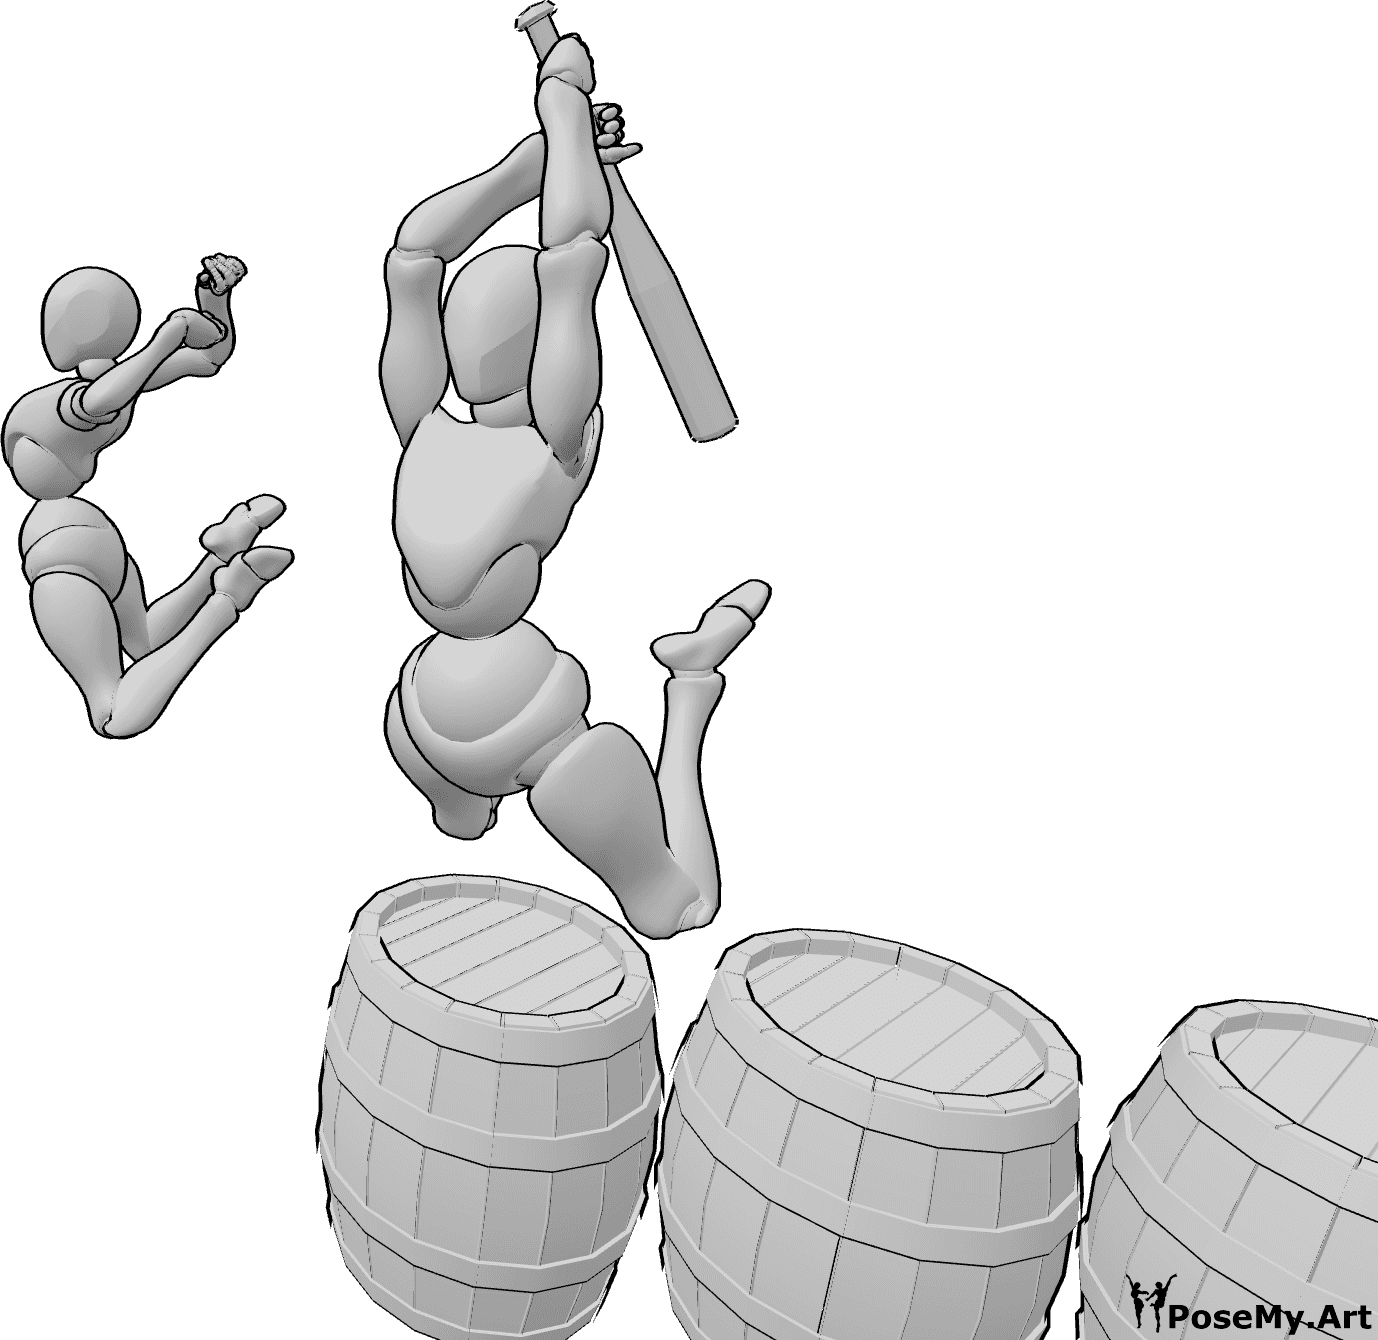 Pose Reference - women jump attack from barrels - two women jump from barrels, one with bat, legs to the back